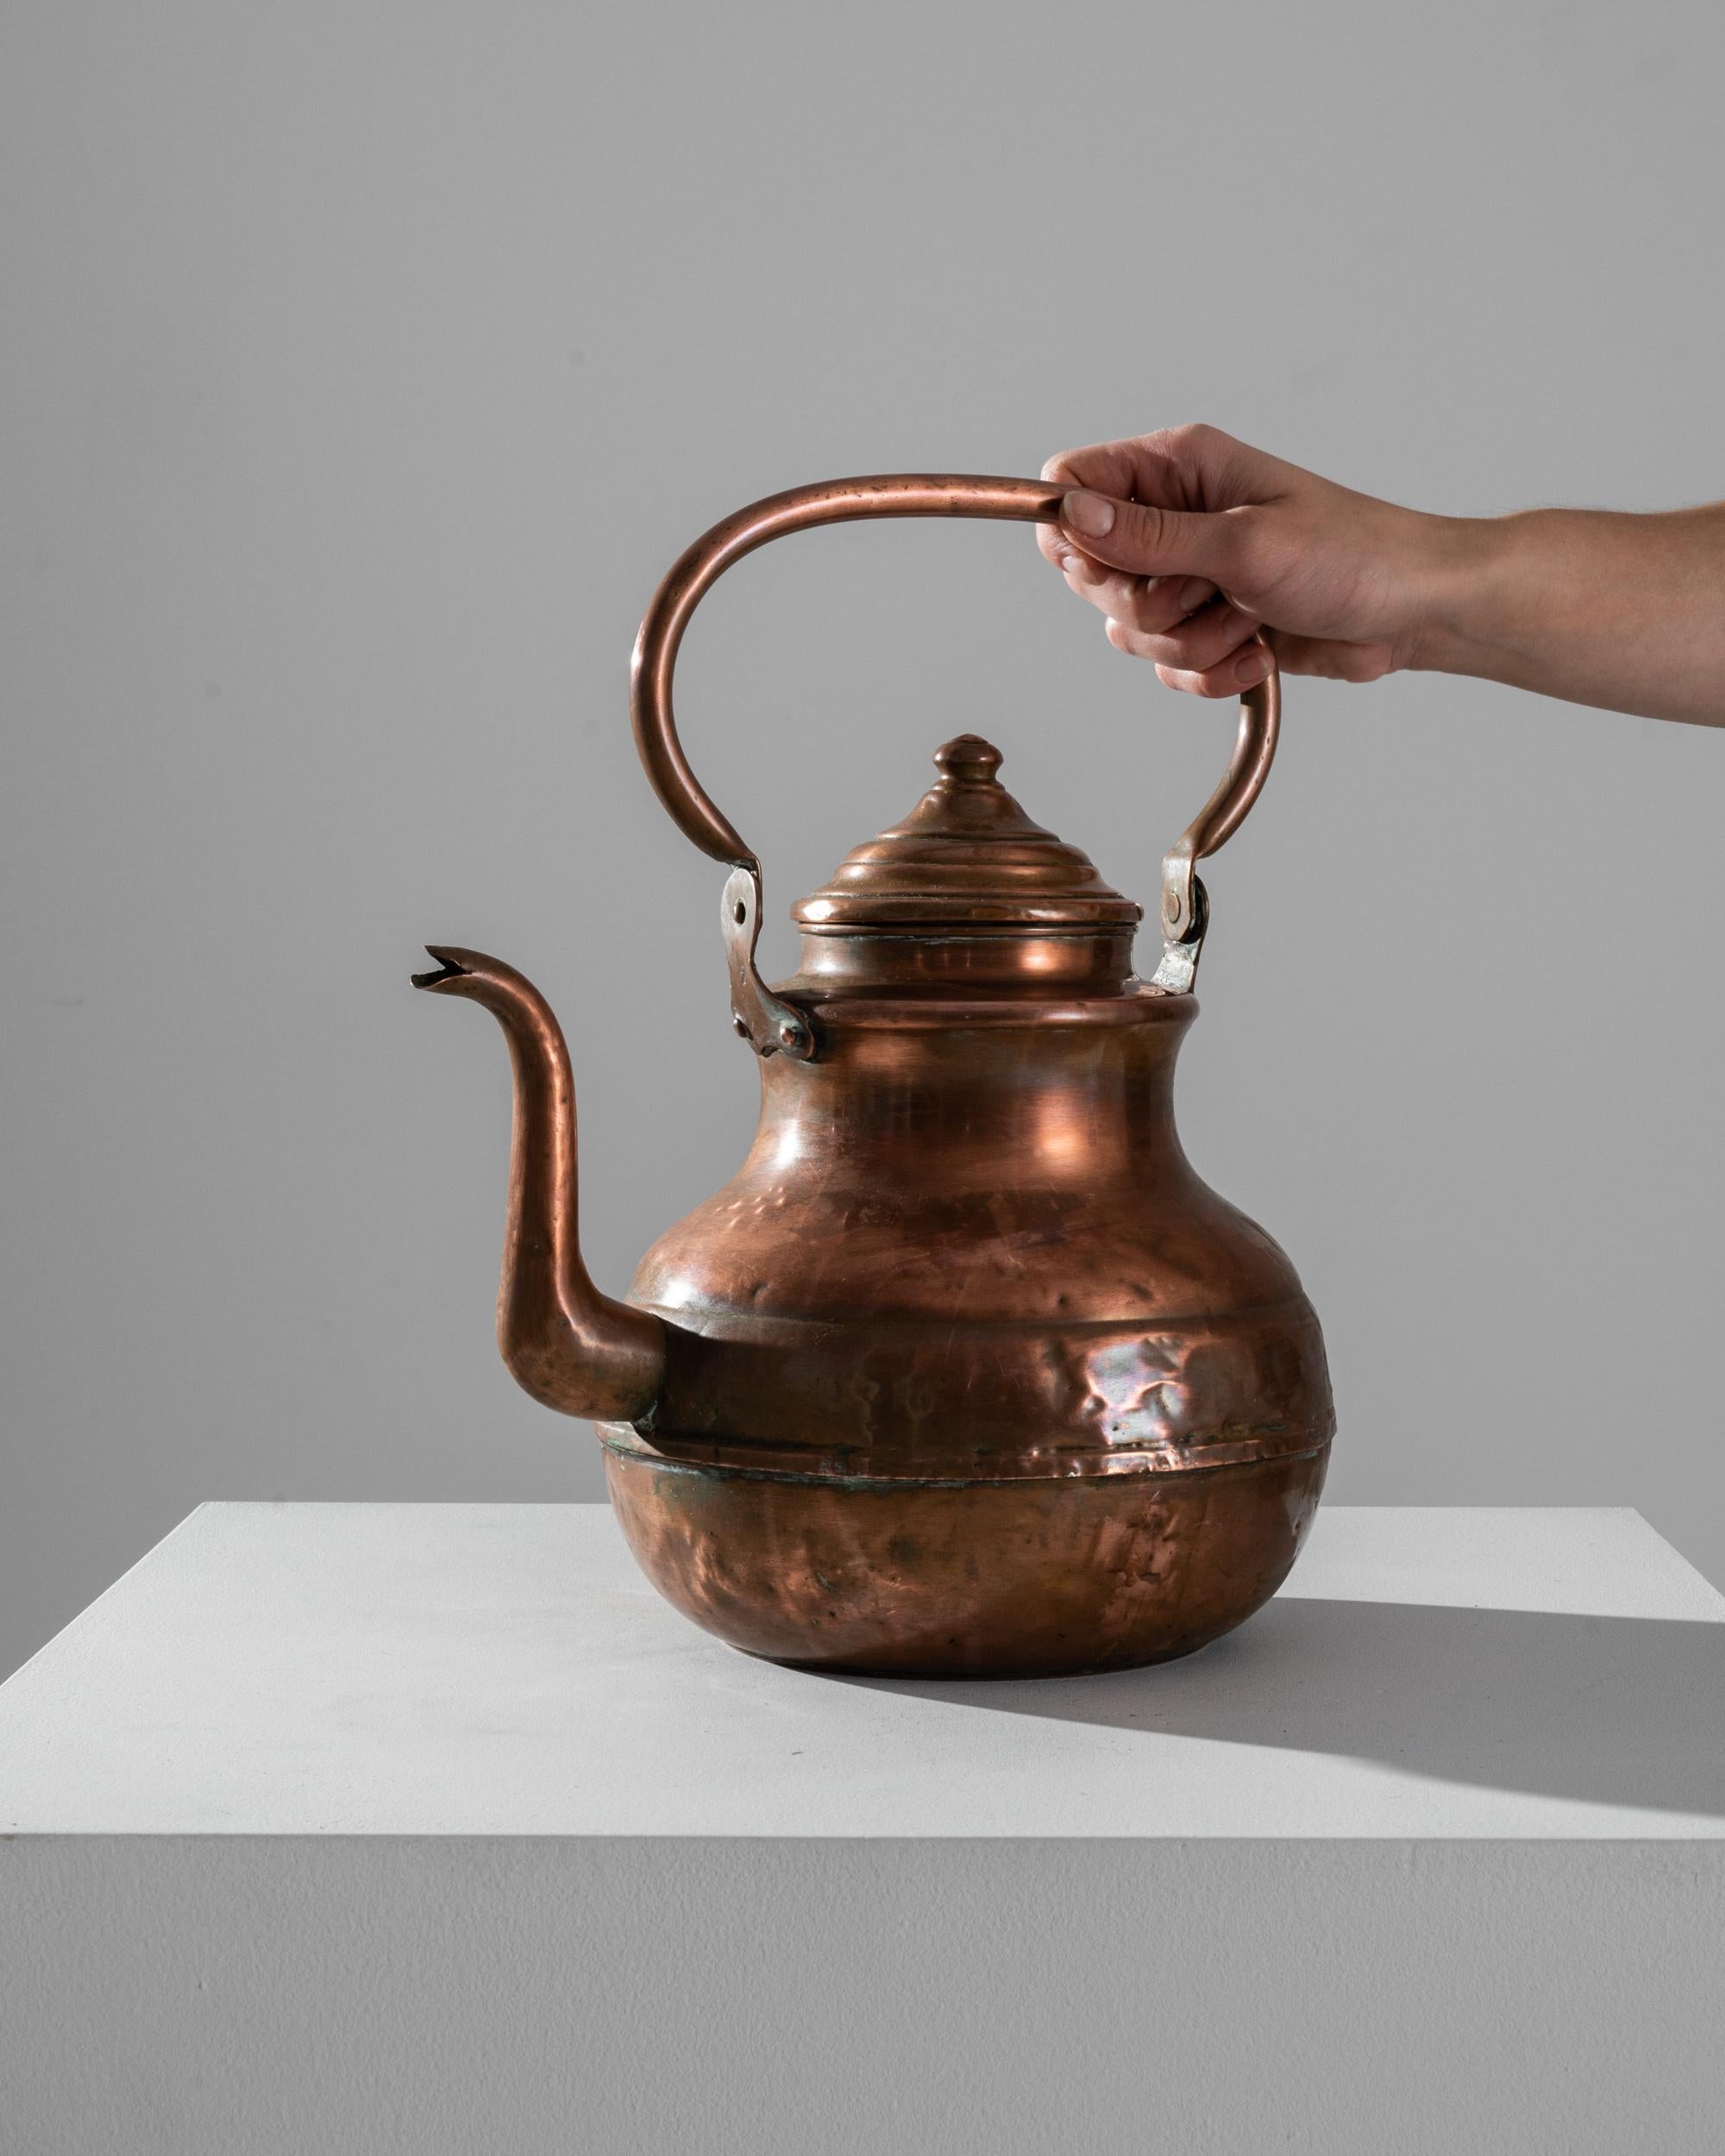 The perfect vessel for warming your brew. Chocolate, coffee and tea have been prepared in copper vessels for centuries, while its unique thermal properties are also suited to chillier fare, milk, cream, juices, or beer. Naturally antibacterial,